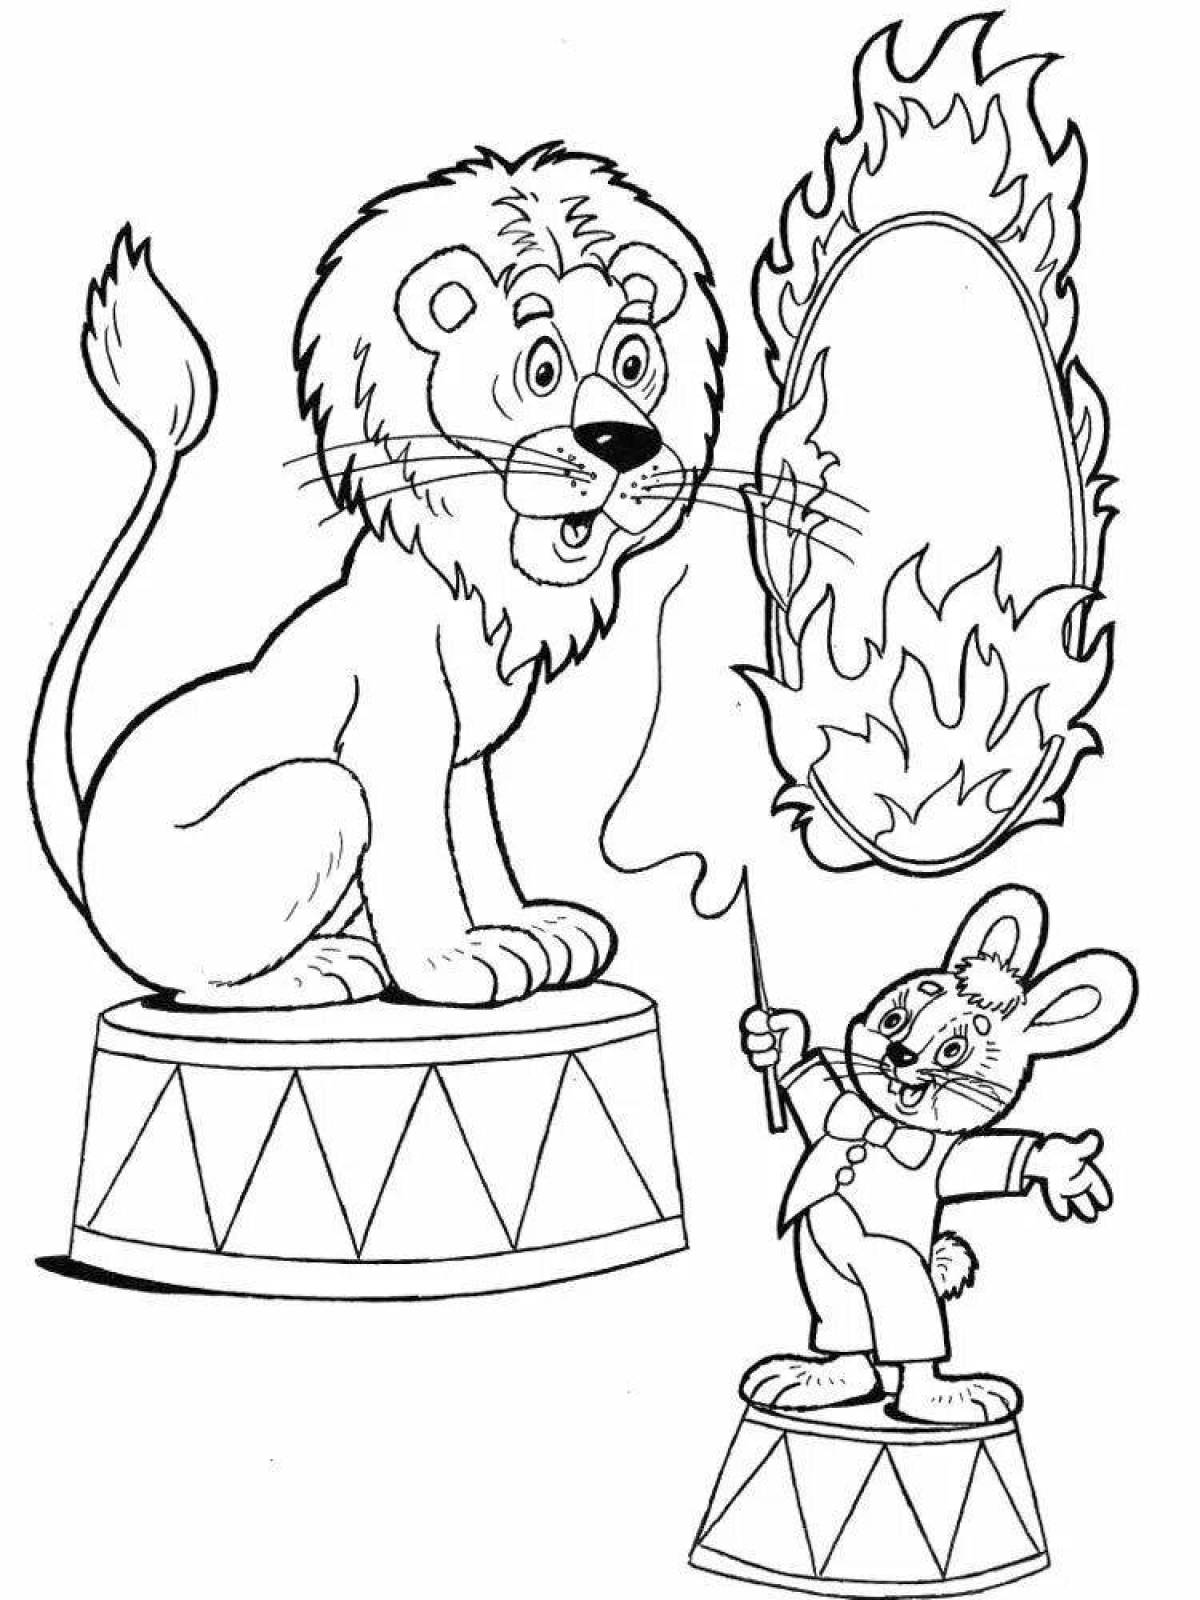 Great circus coloring book for 6-7 year olds